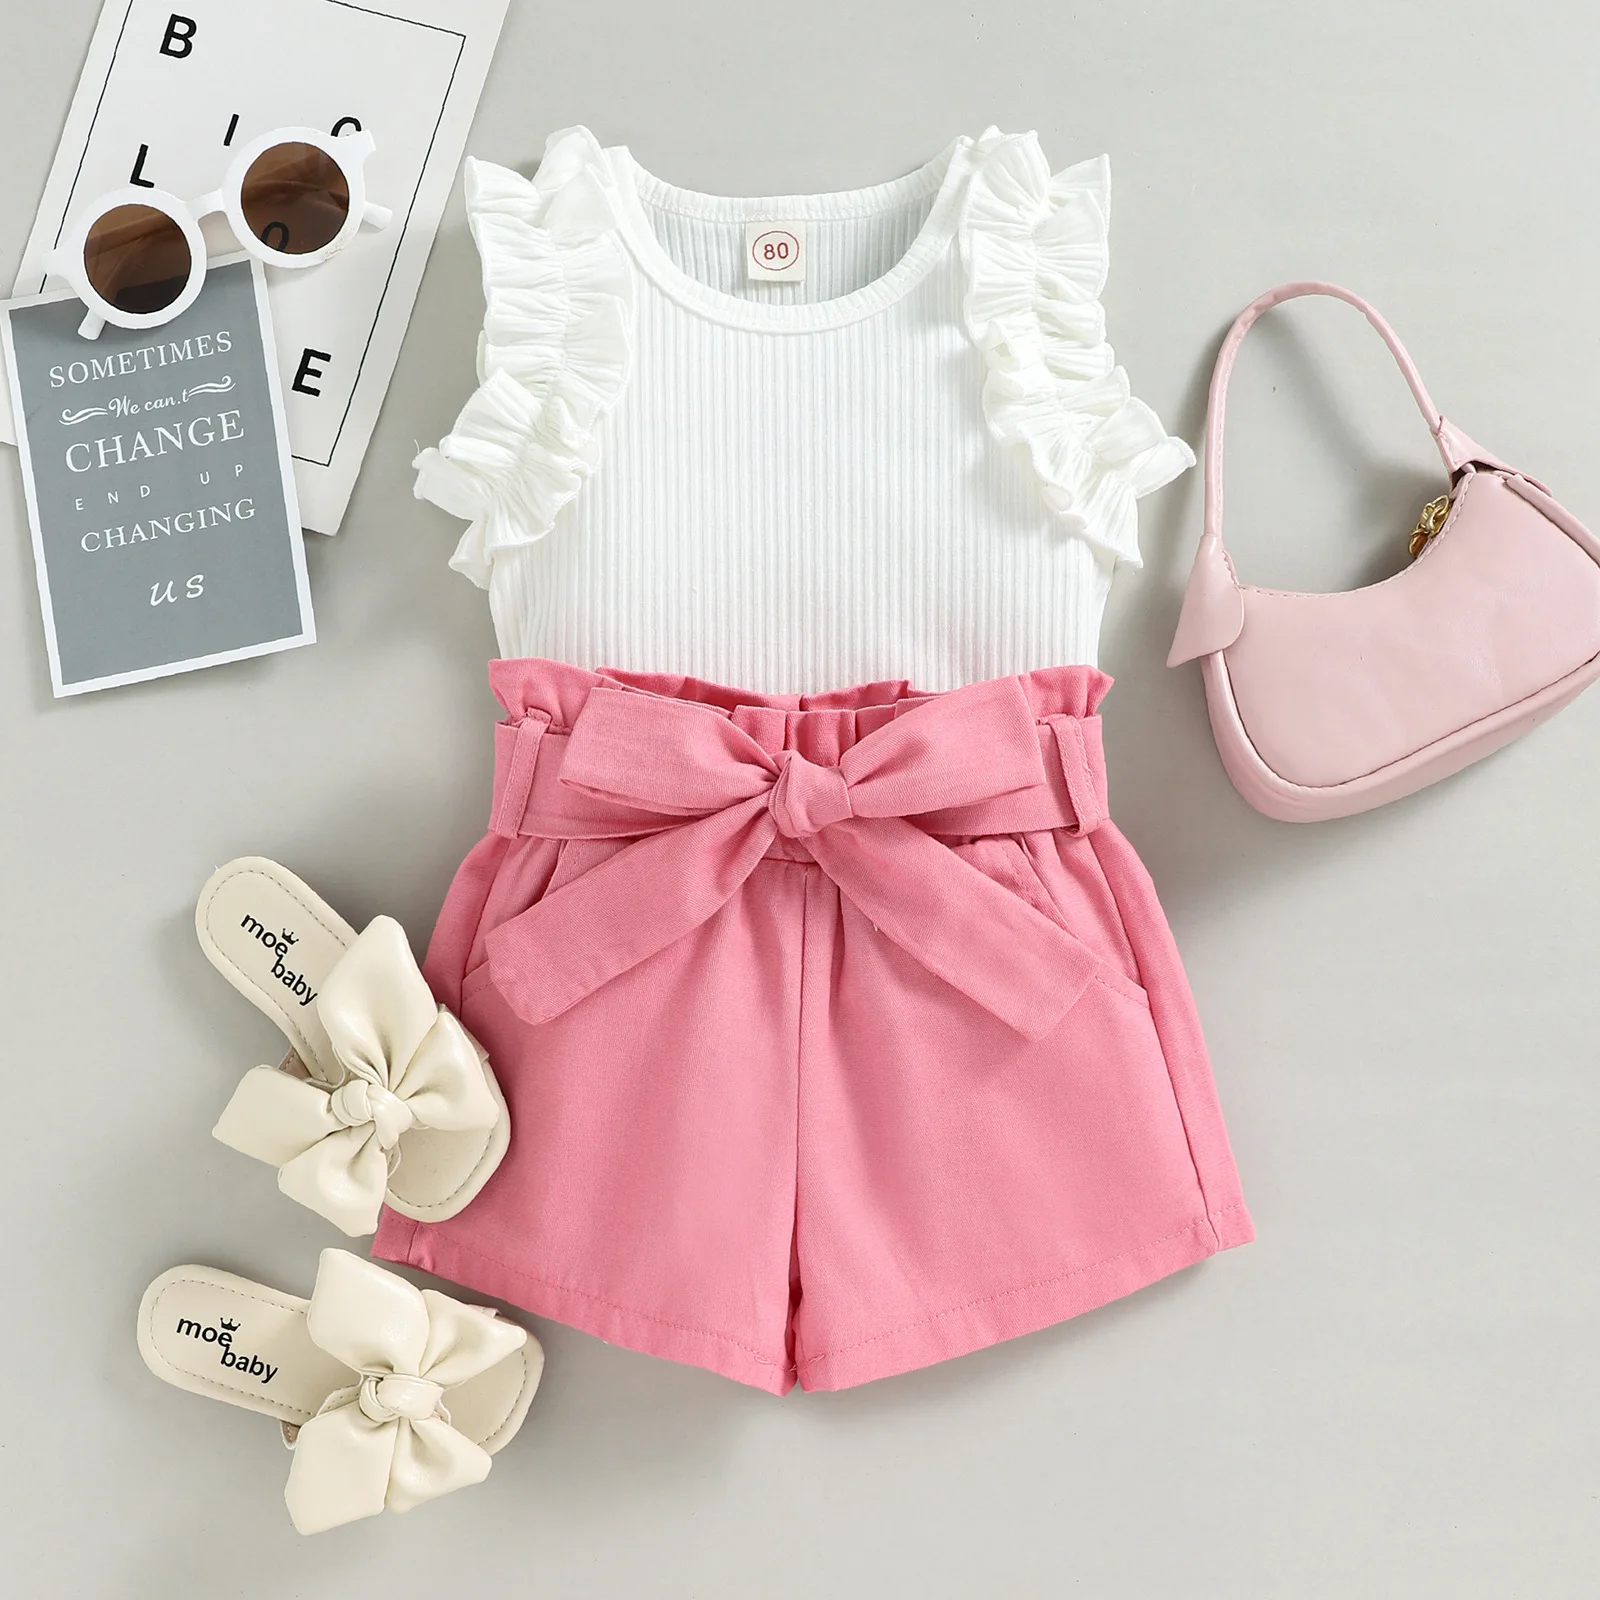 Fashion kids baby girls clothes sets summer children girls clothing suits solid ruffle sleeve tops shorts with belt